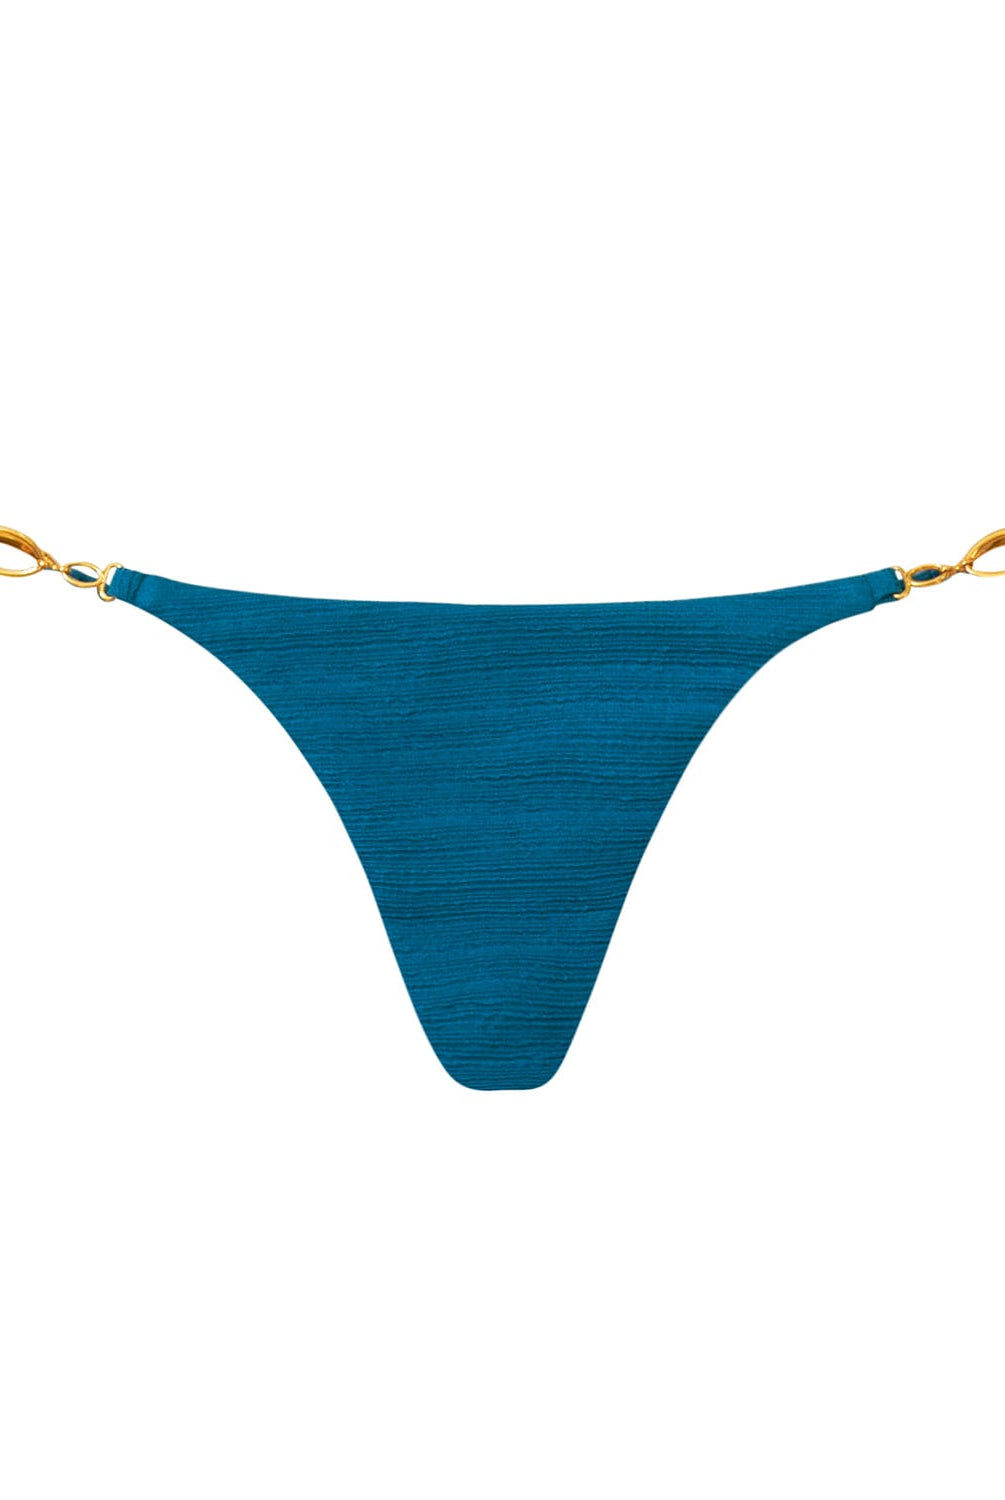 A textured turquoise bikini bottom with gold details. Featured against a white wall background.